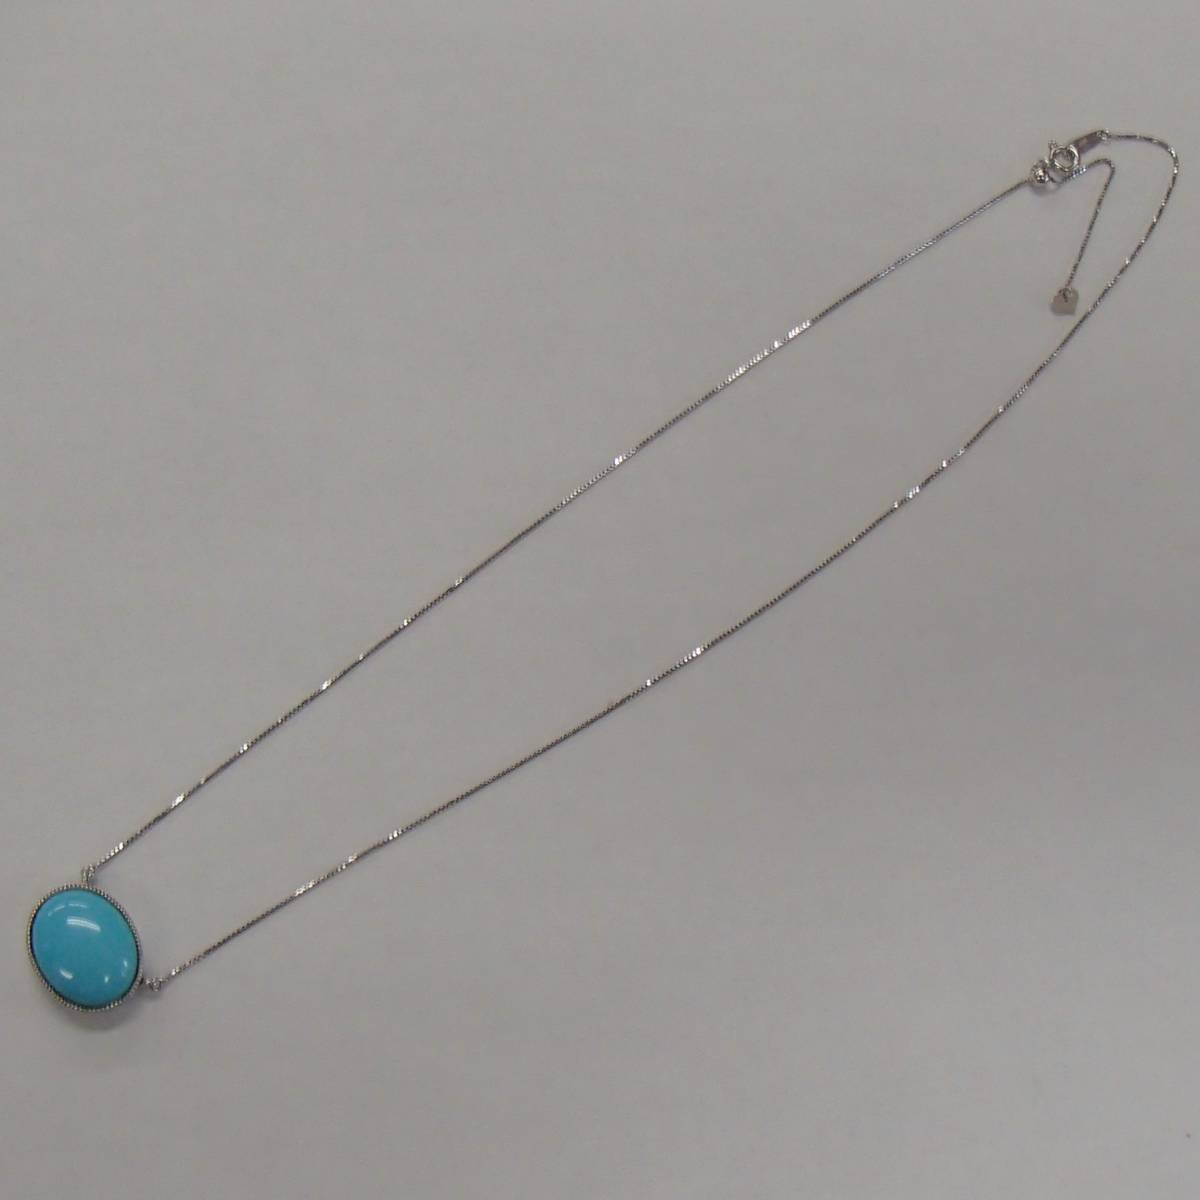 0~47. adjuster attaching K18WG turquoise necklace white gold 18 gold turquoise pendant Venetian chain 